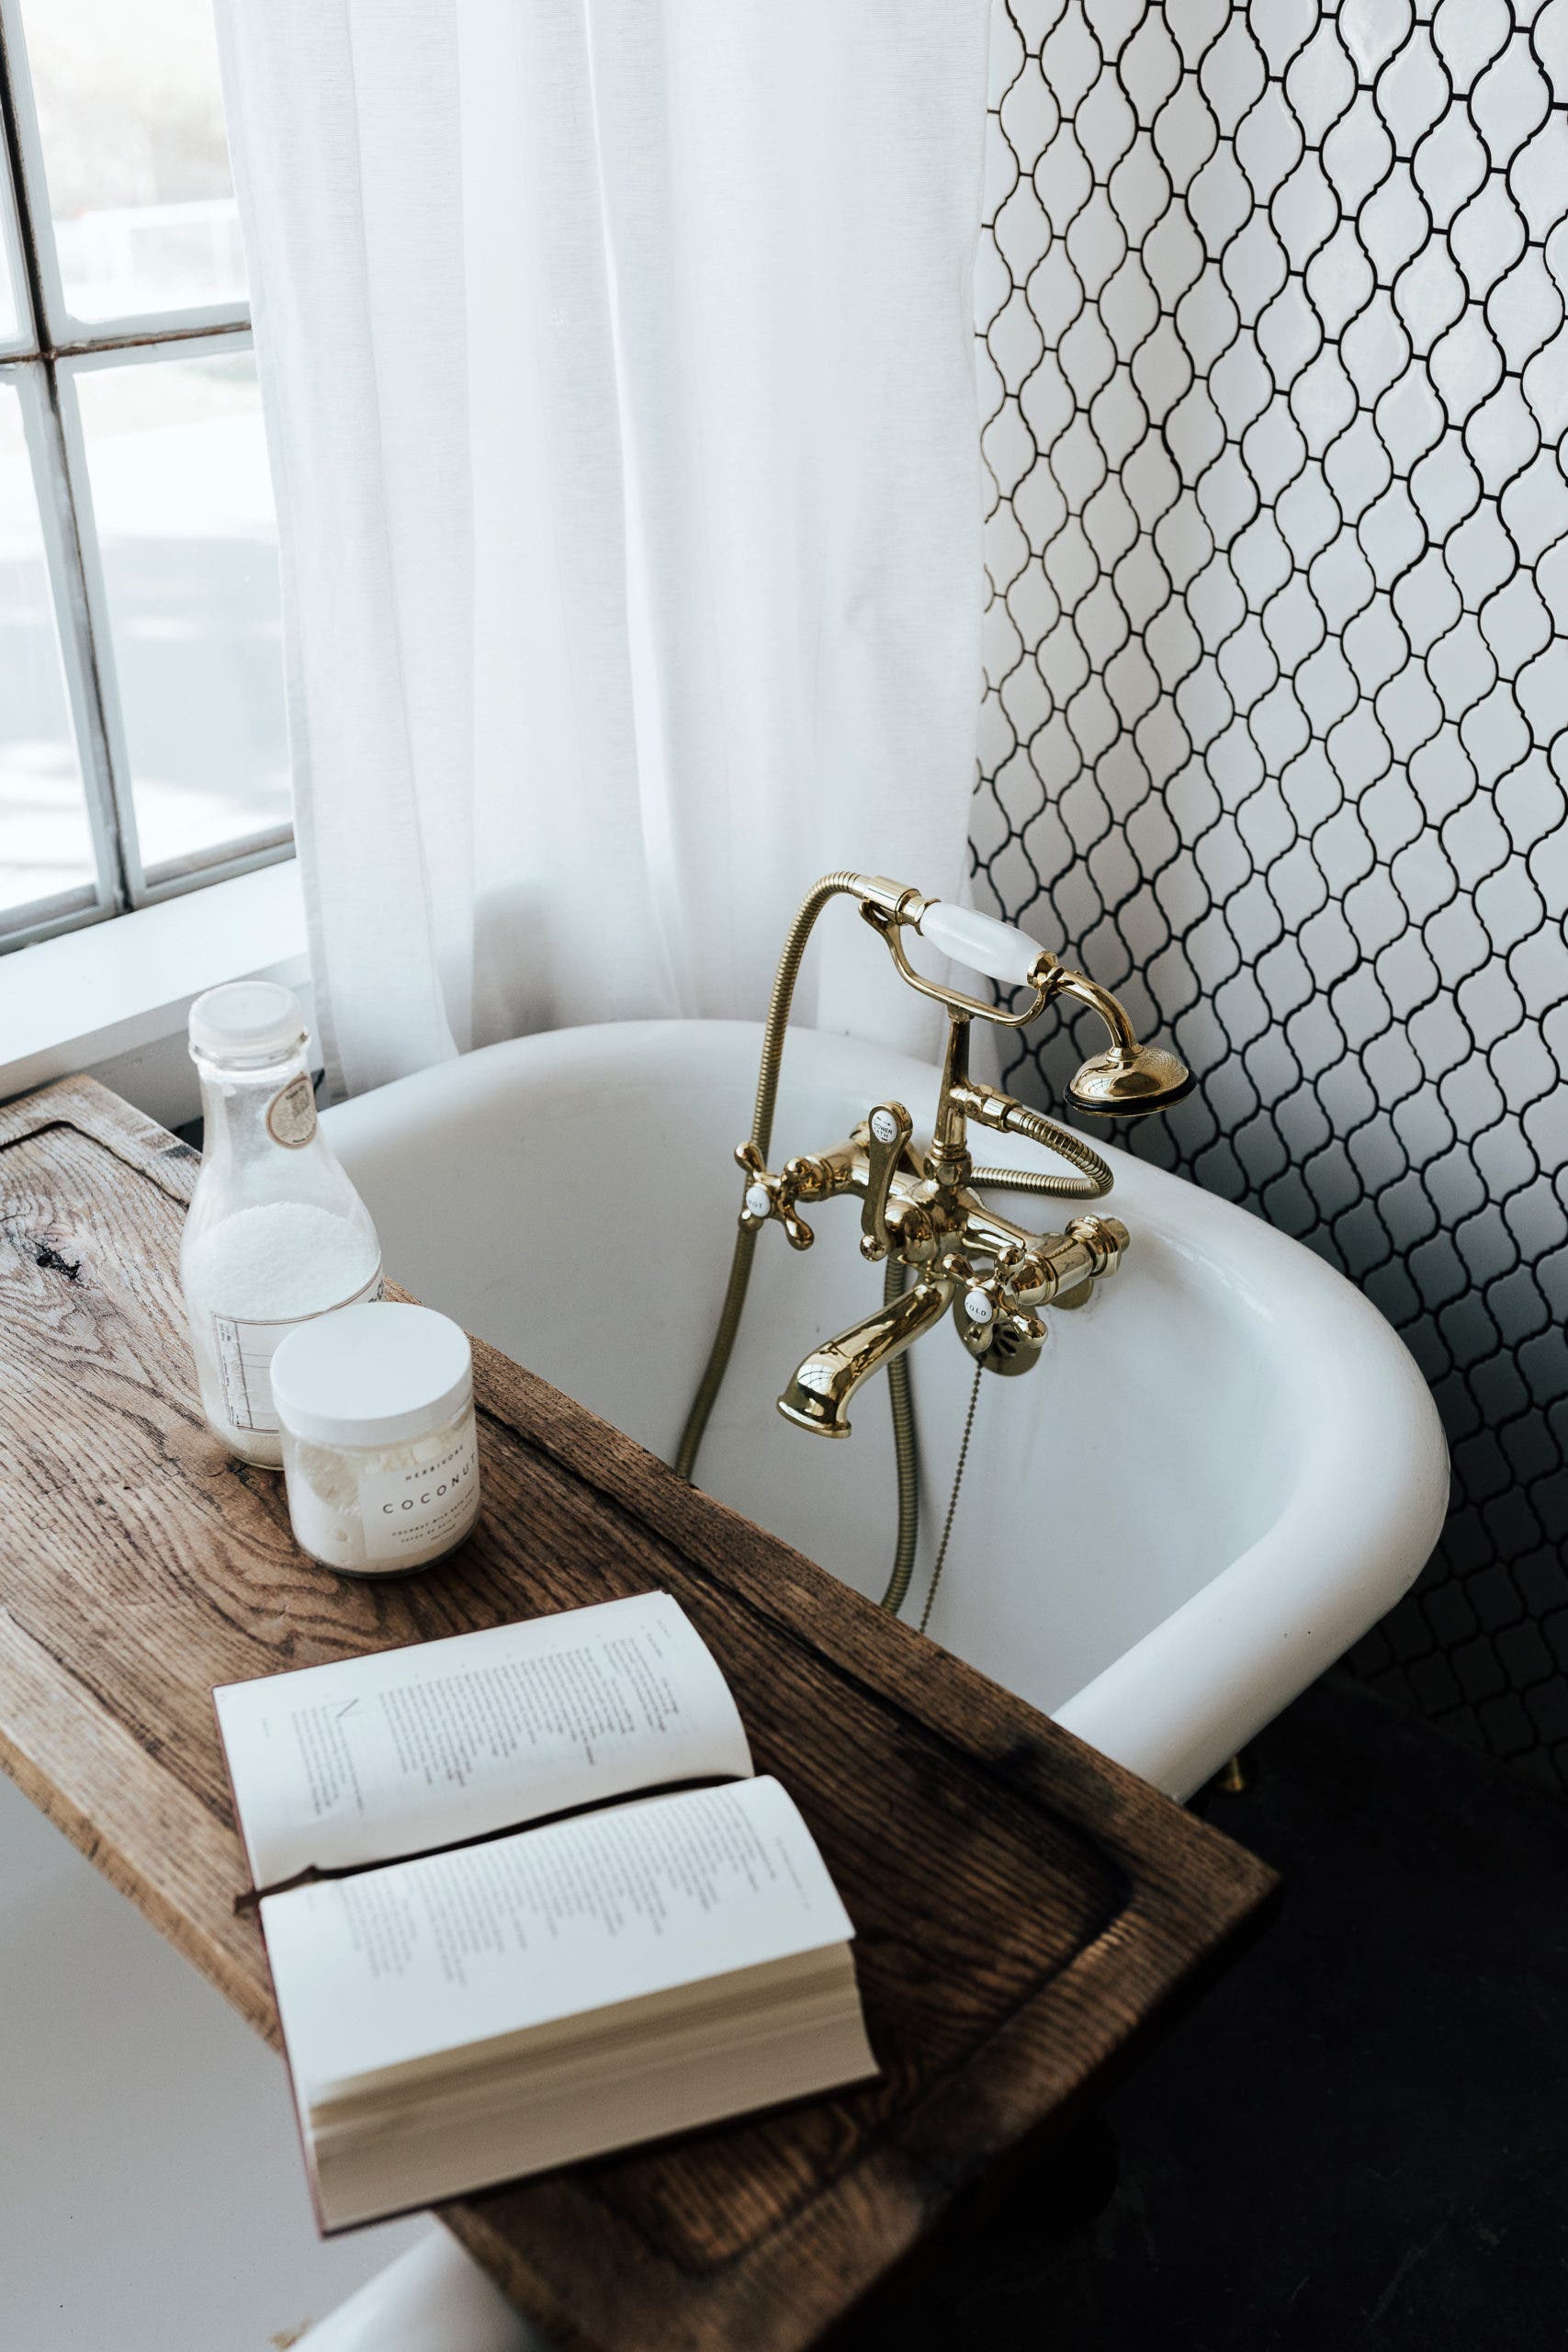 Let Your Zodiac Pick Your Next Kitchen/Bathroom Fixture: Water Signs